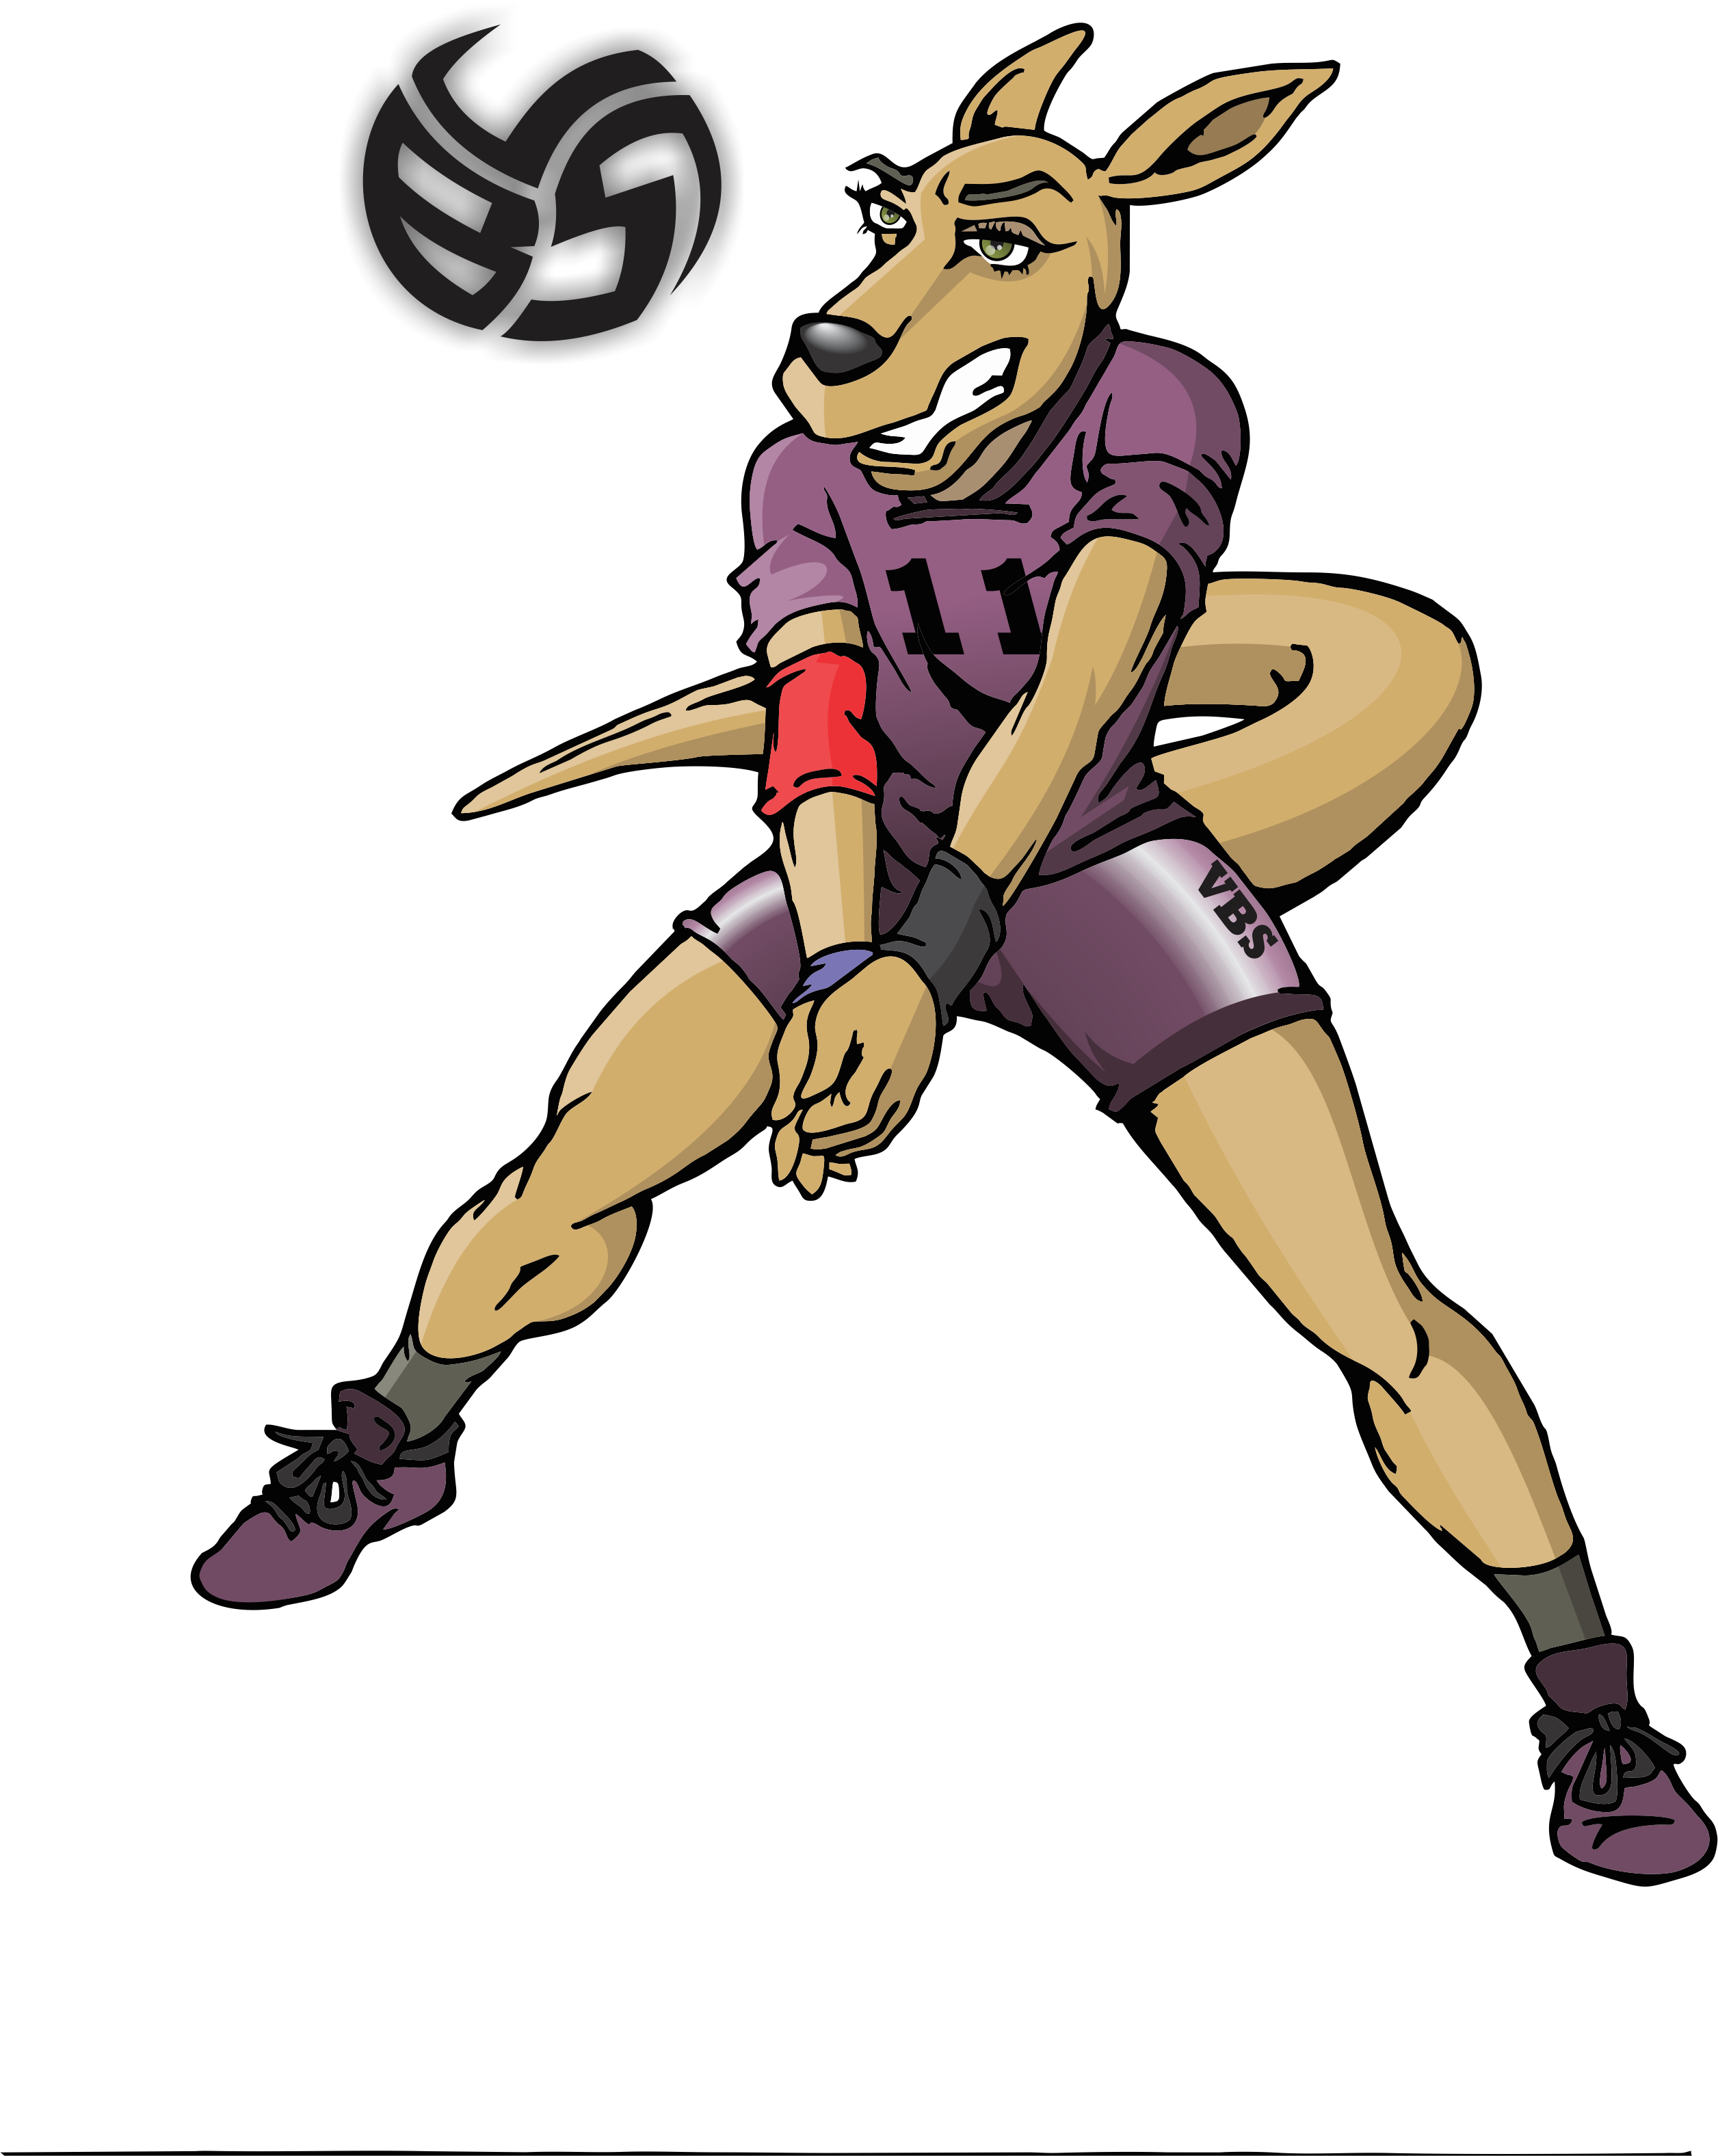 Meet Resee The Kangaroo And Passing Specialist On Volleybragswag's - Volleyball (2512x3153)